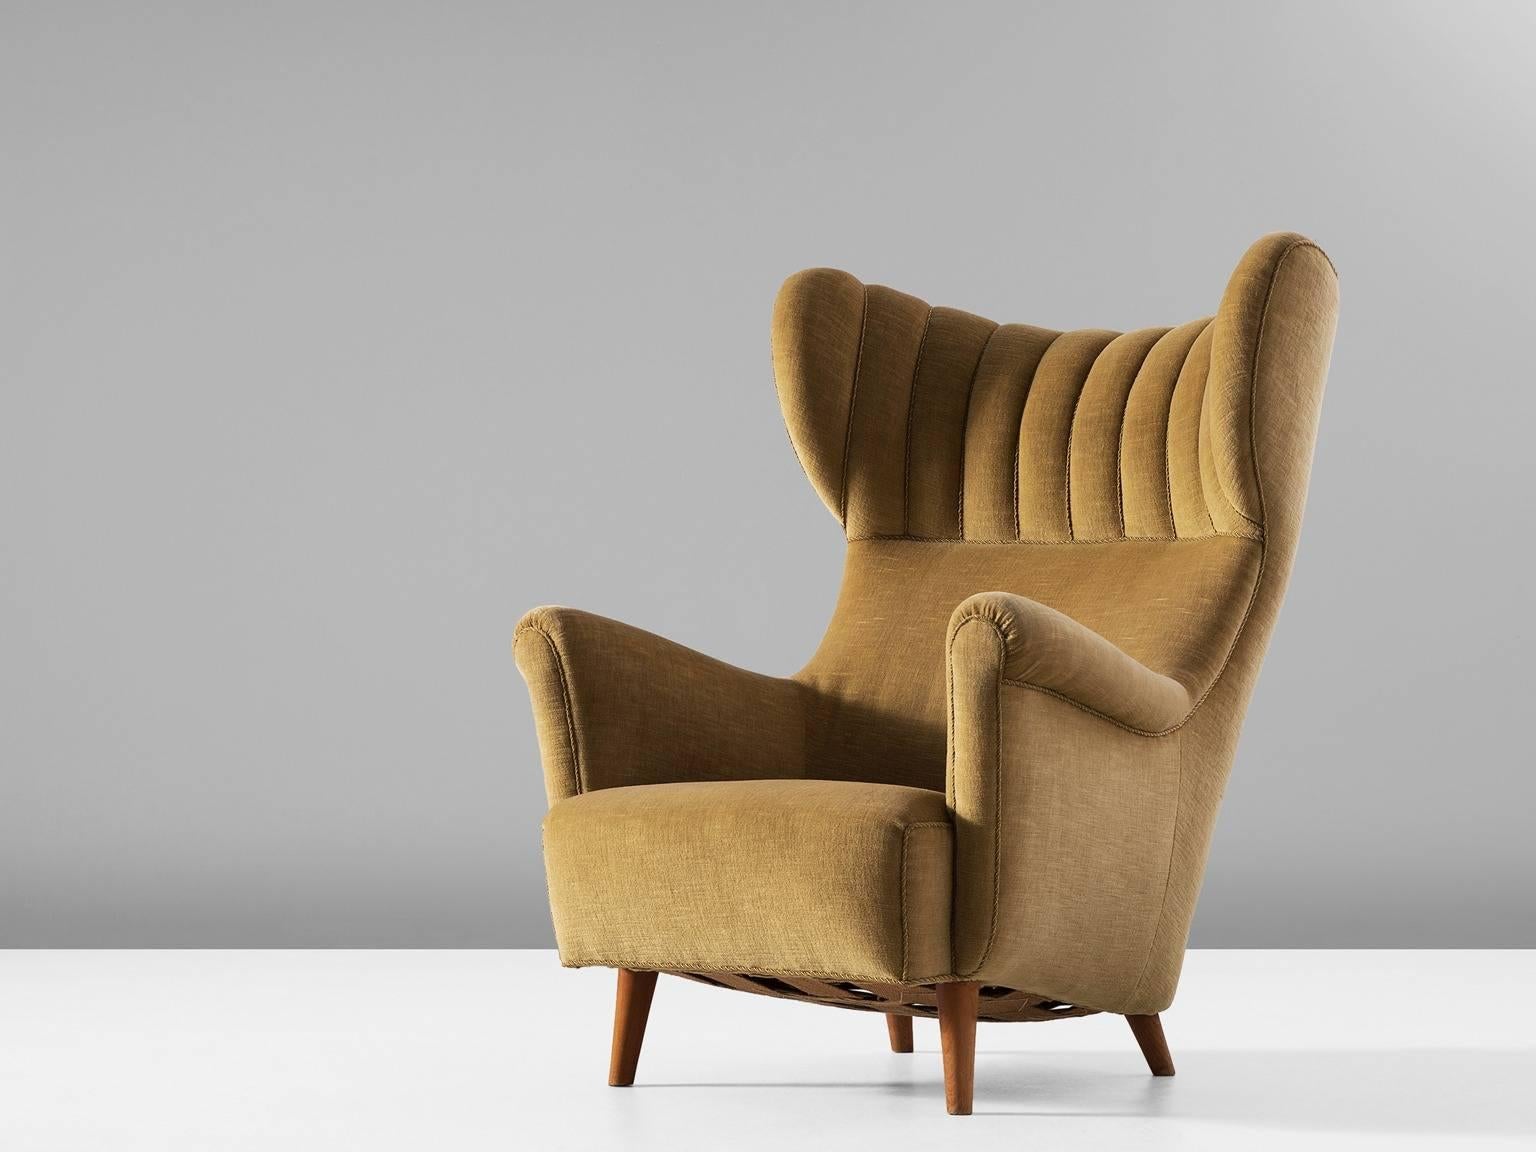 Wingback chair, in fabric and wood, Italy, 1960s. 

Large armchair in off-white/crème mohair. The eye-catching detail is the large padded wingback. Besides this, the armrest are also very elegant. The tight outside is a nice contrast to the more